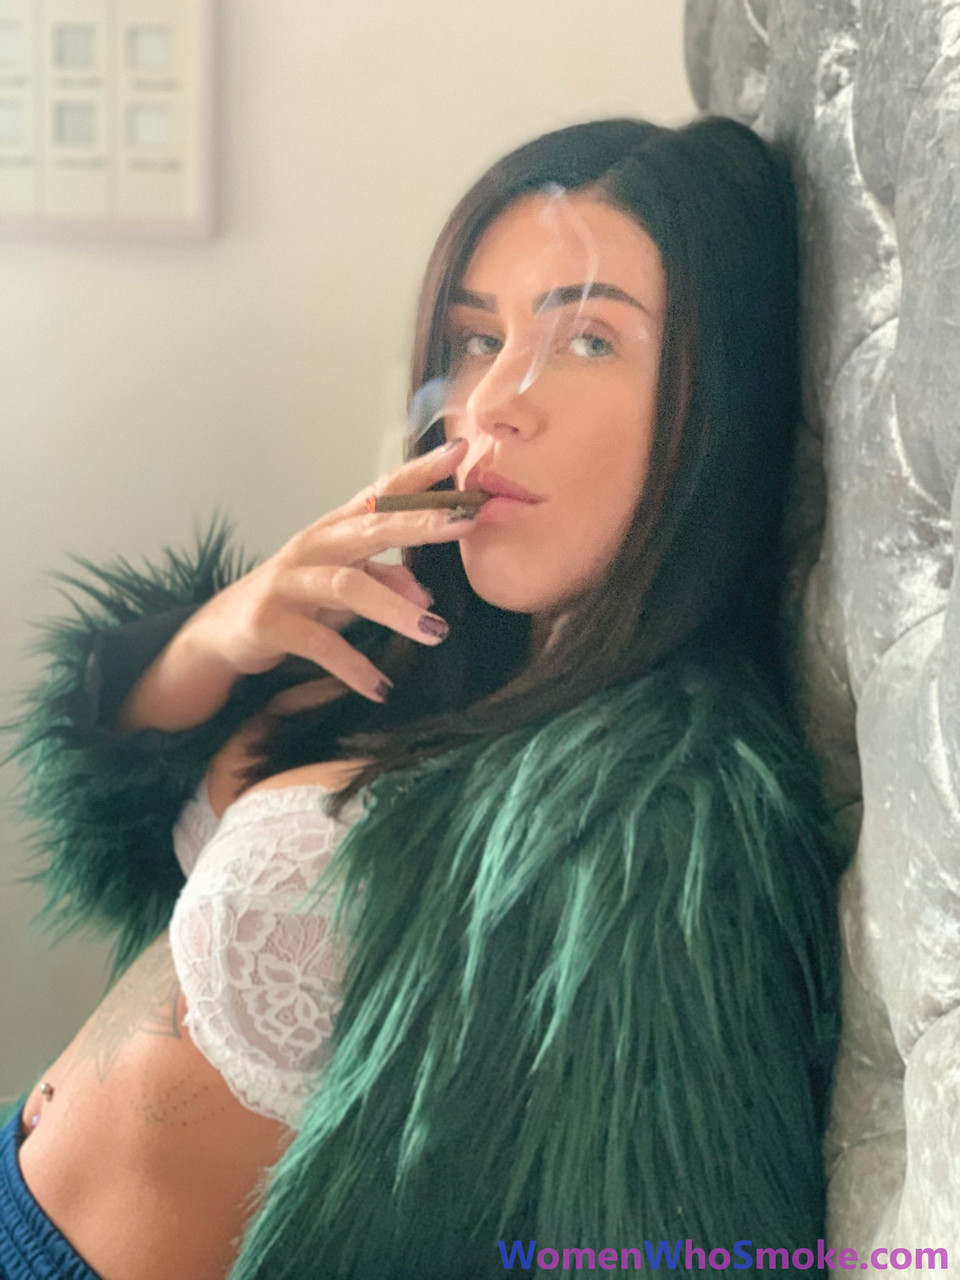 Stunning brunette teases with her big boobs while smoking in sexy lingerie порно фото #426607881 | Women Who Smoke Pics, Smoking, мобильное порно